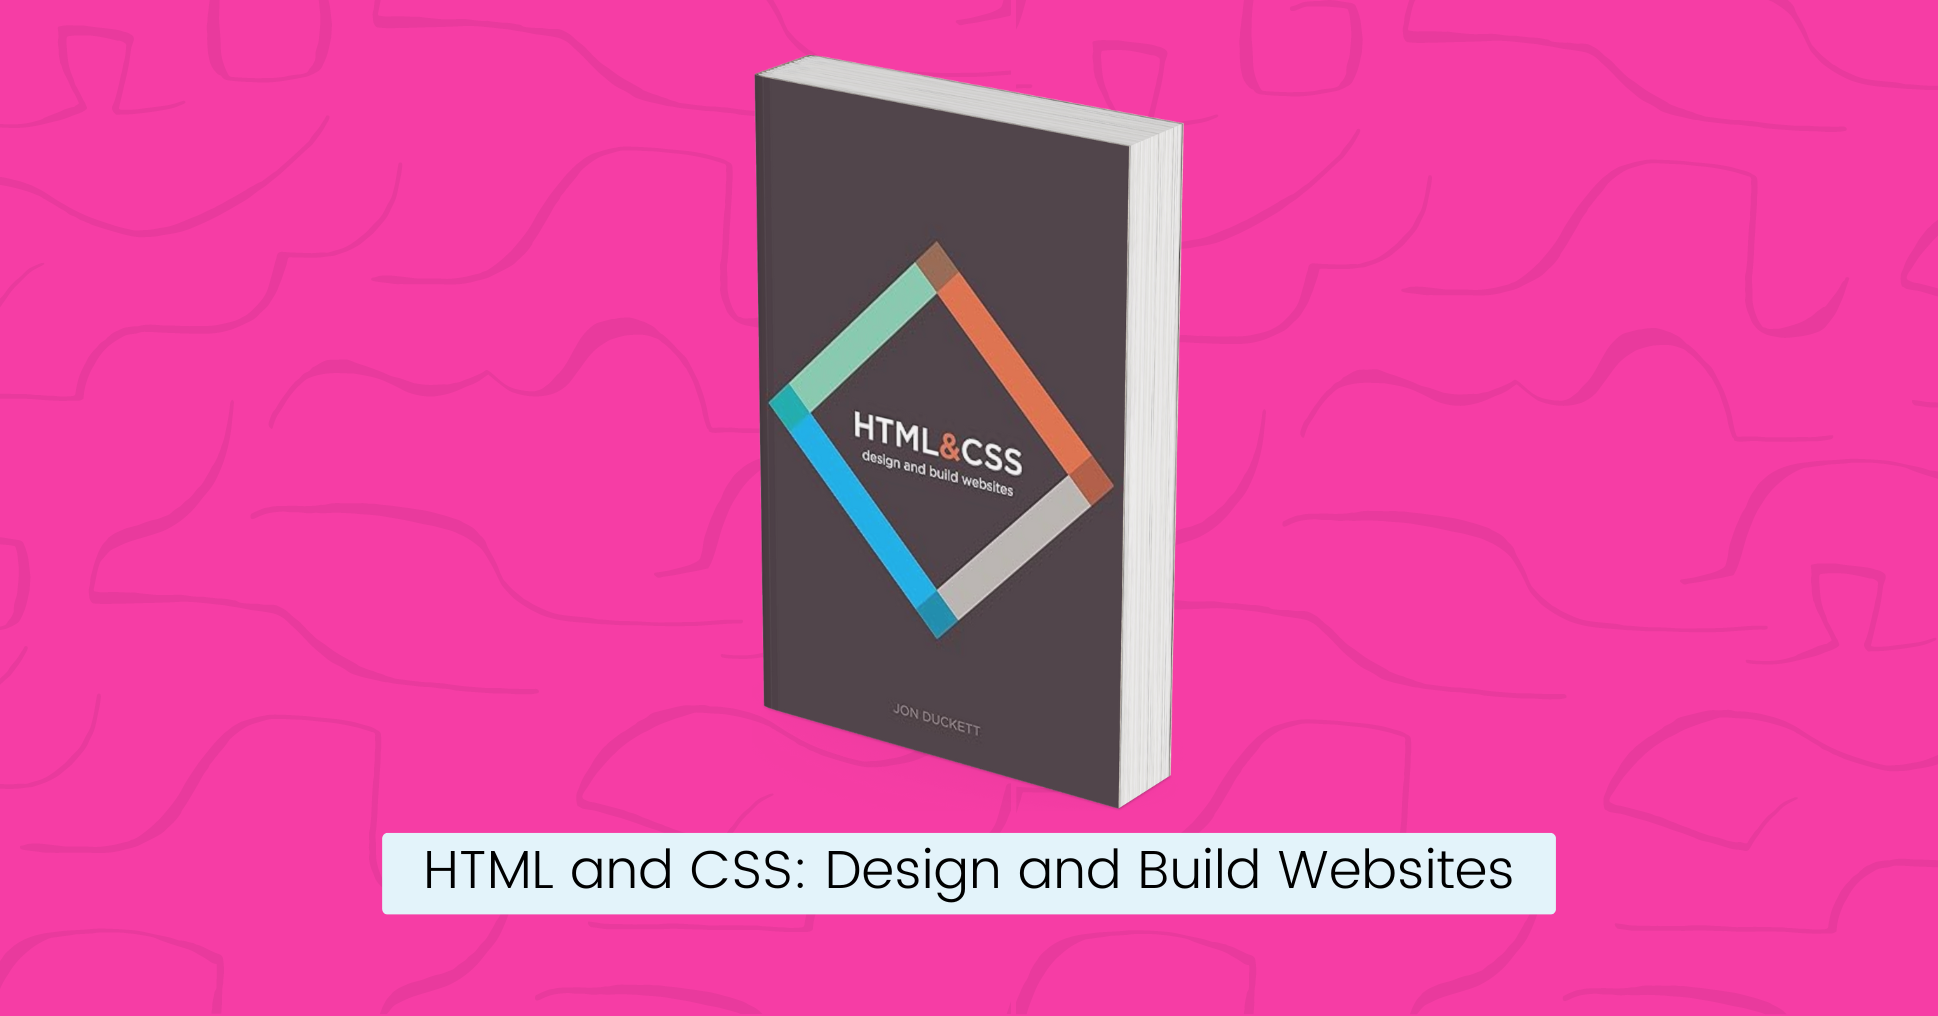 Cover of the Book: HTML and CSS Design and Build Websites